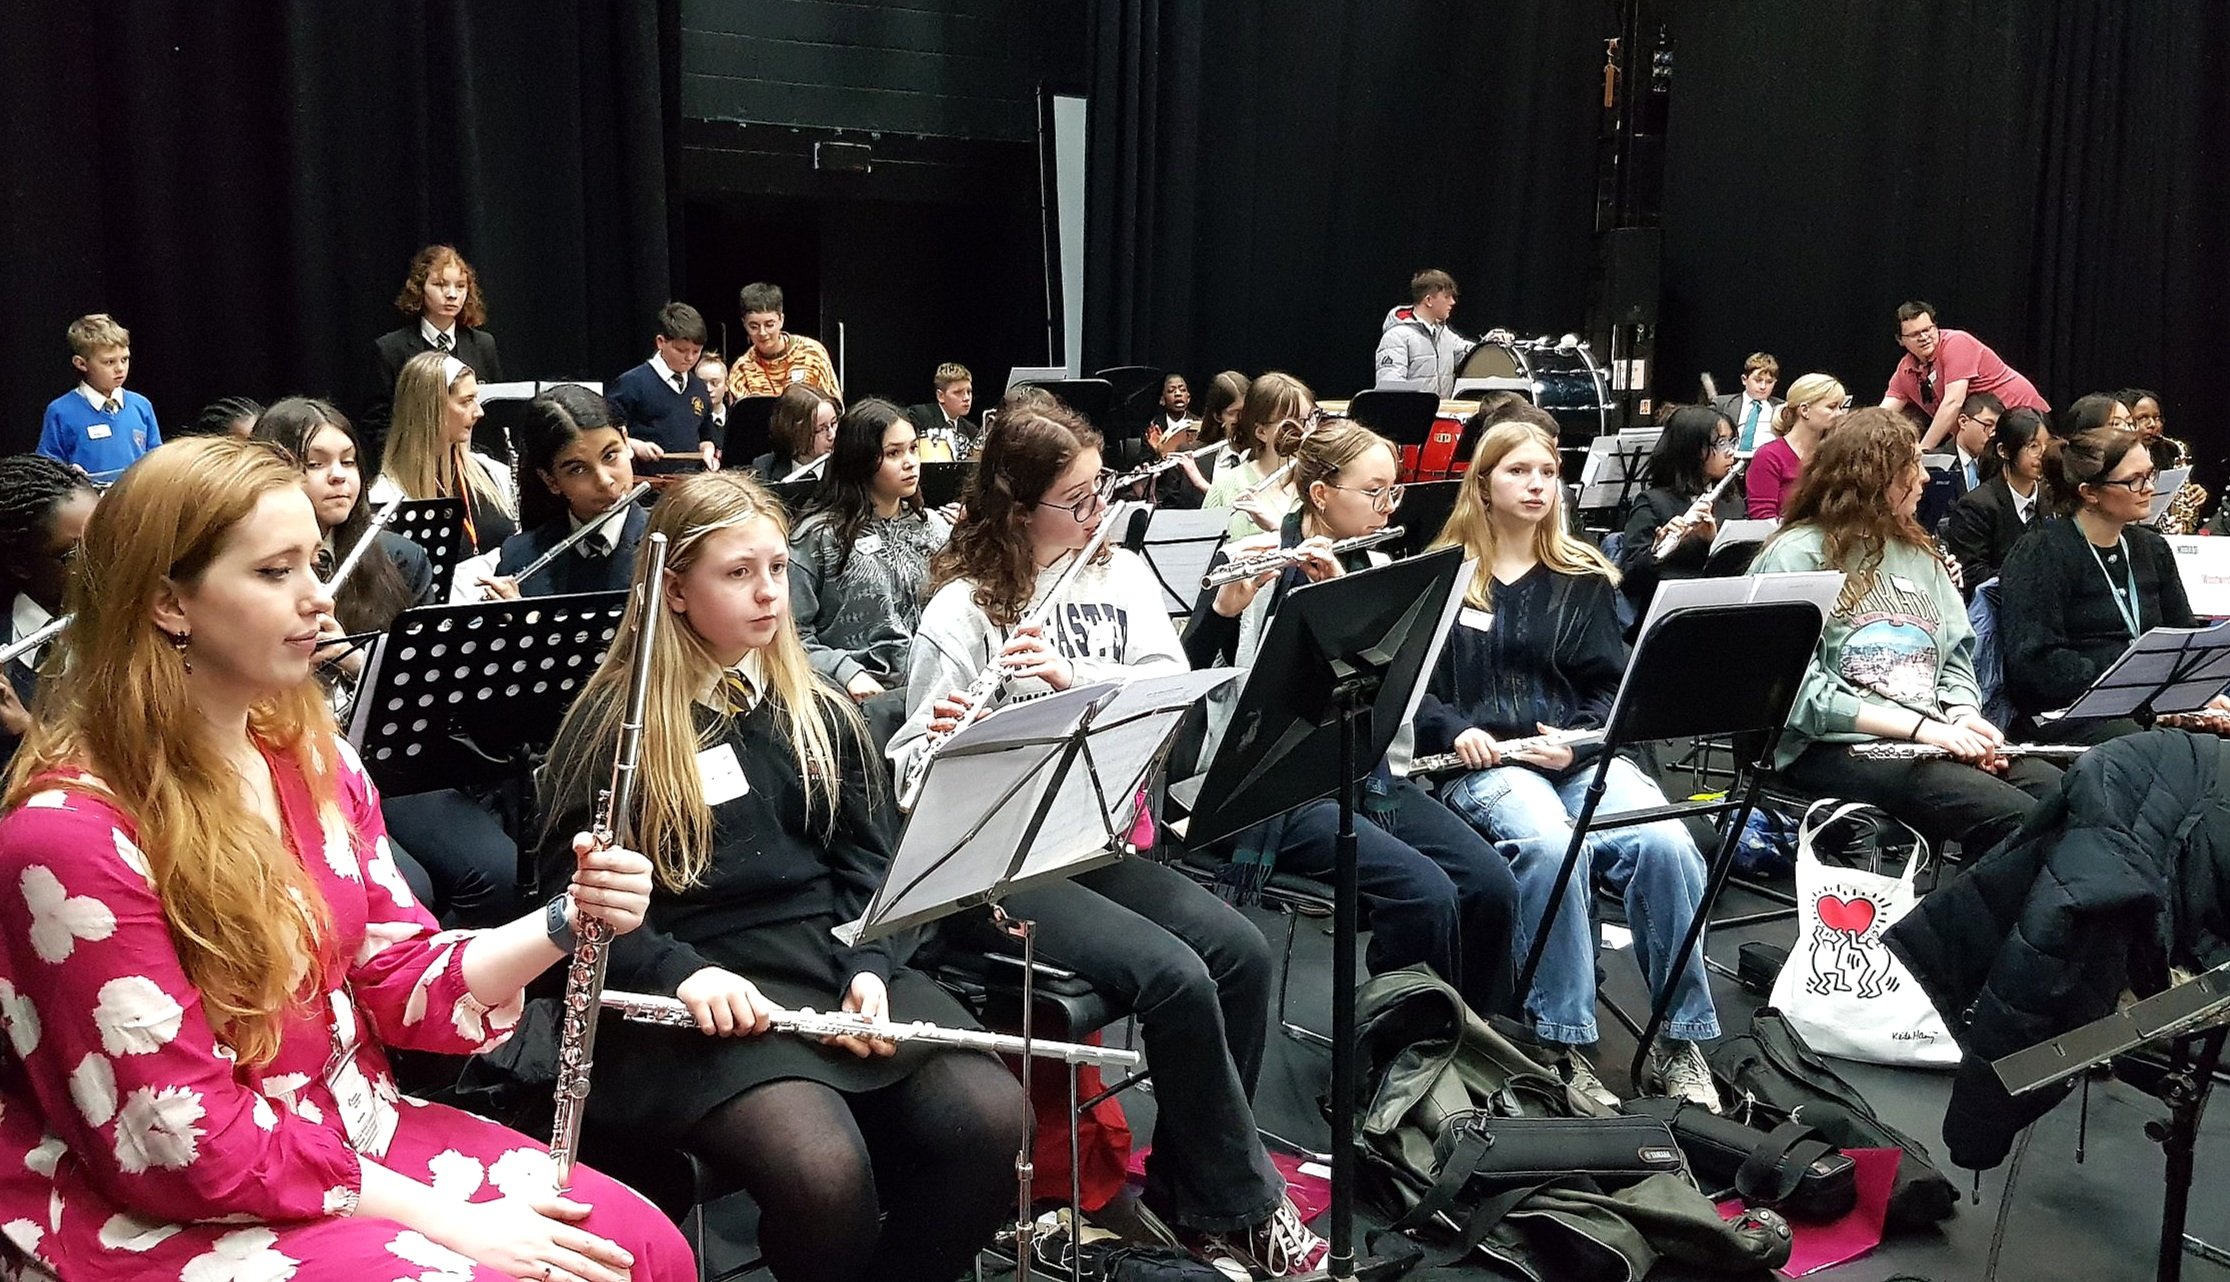 Our superb woodwind section